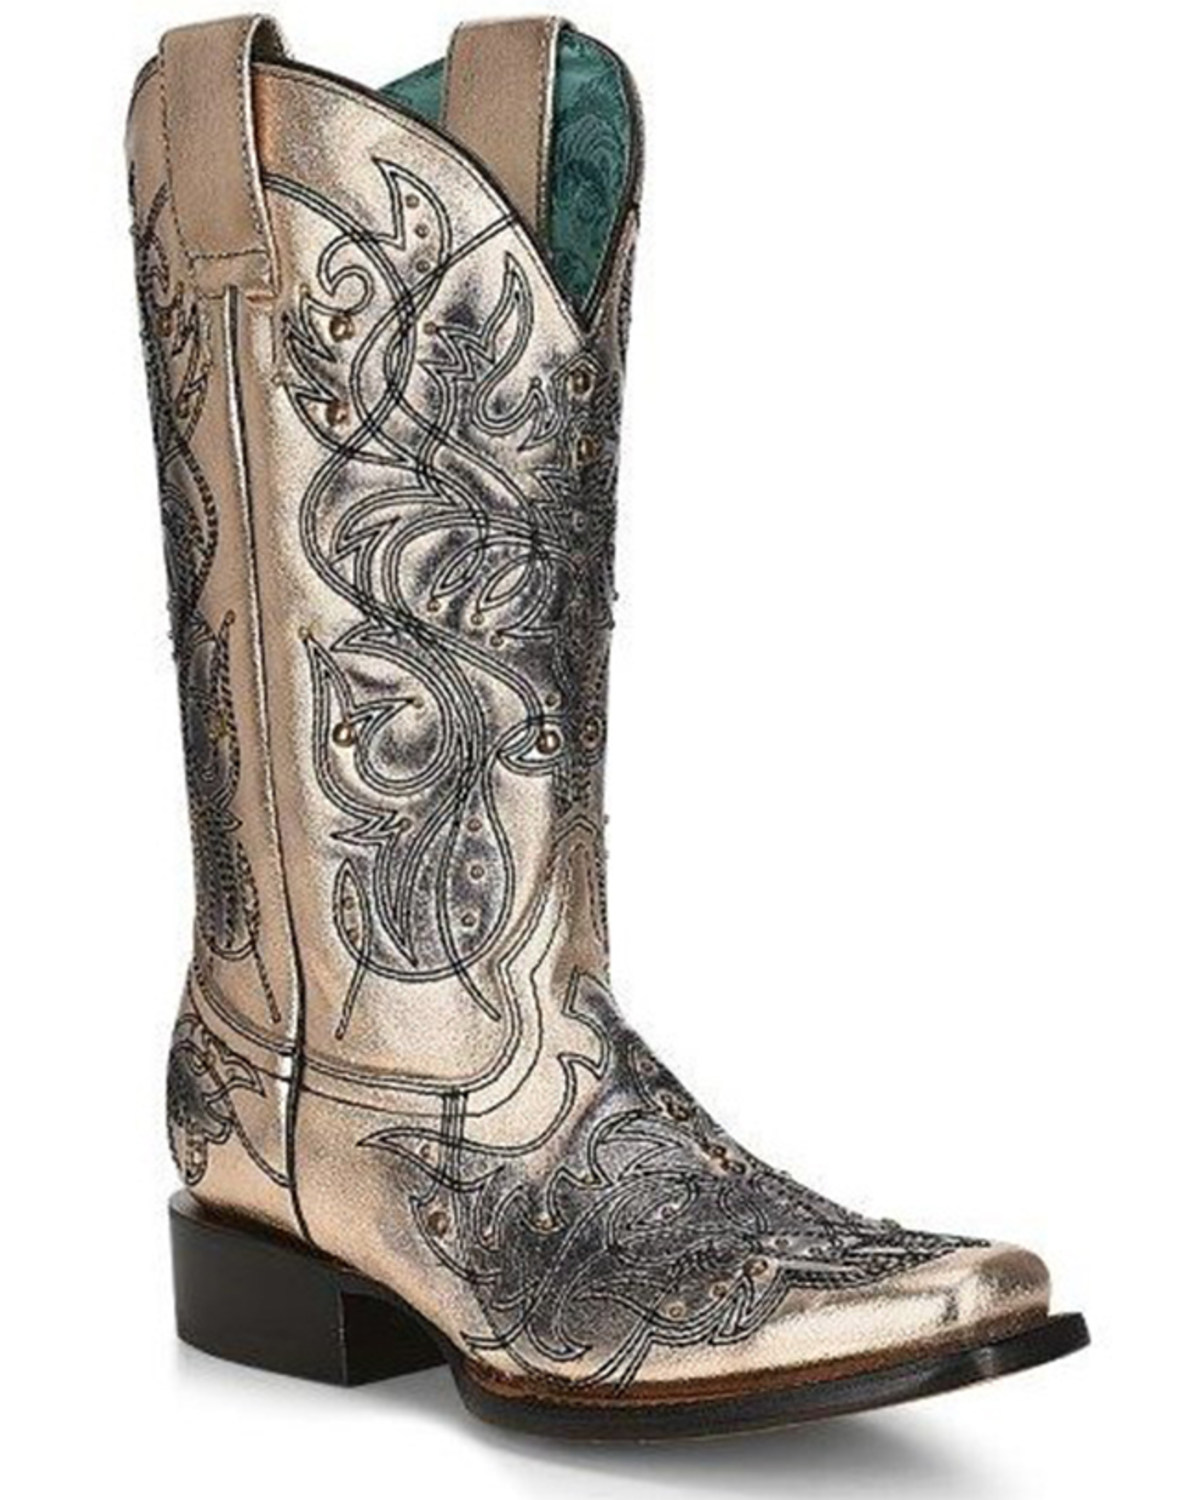 Corral Women's Metallic Studded Western Boots - Square Toe